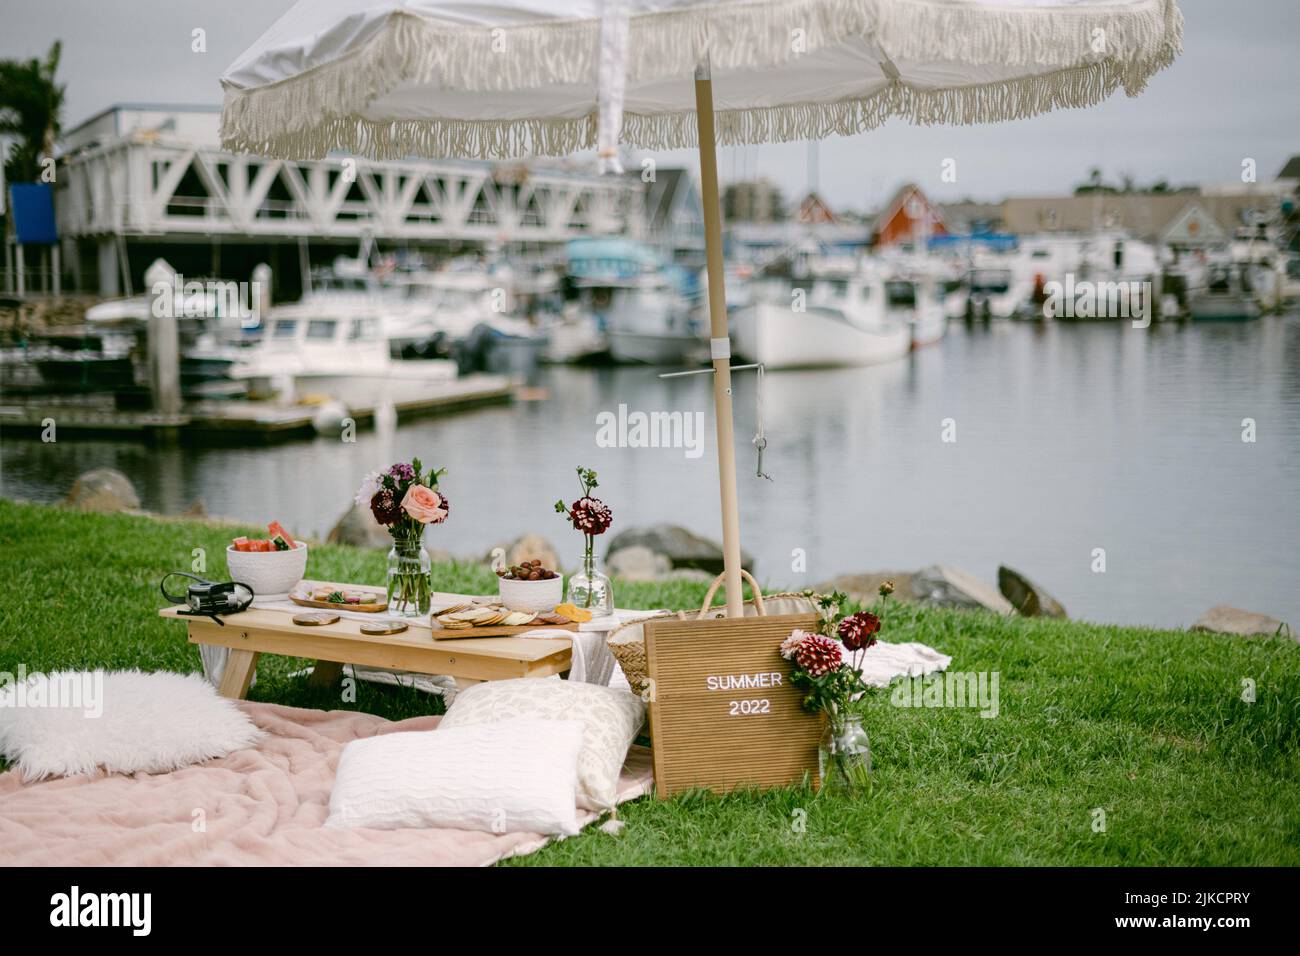 picnic setting at the oceanside harbor Stock Photo